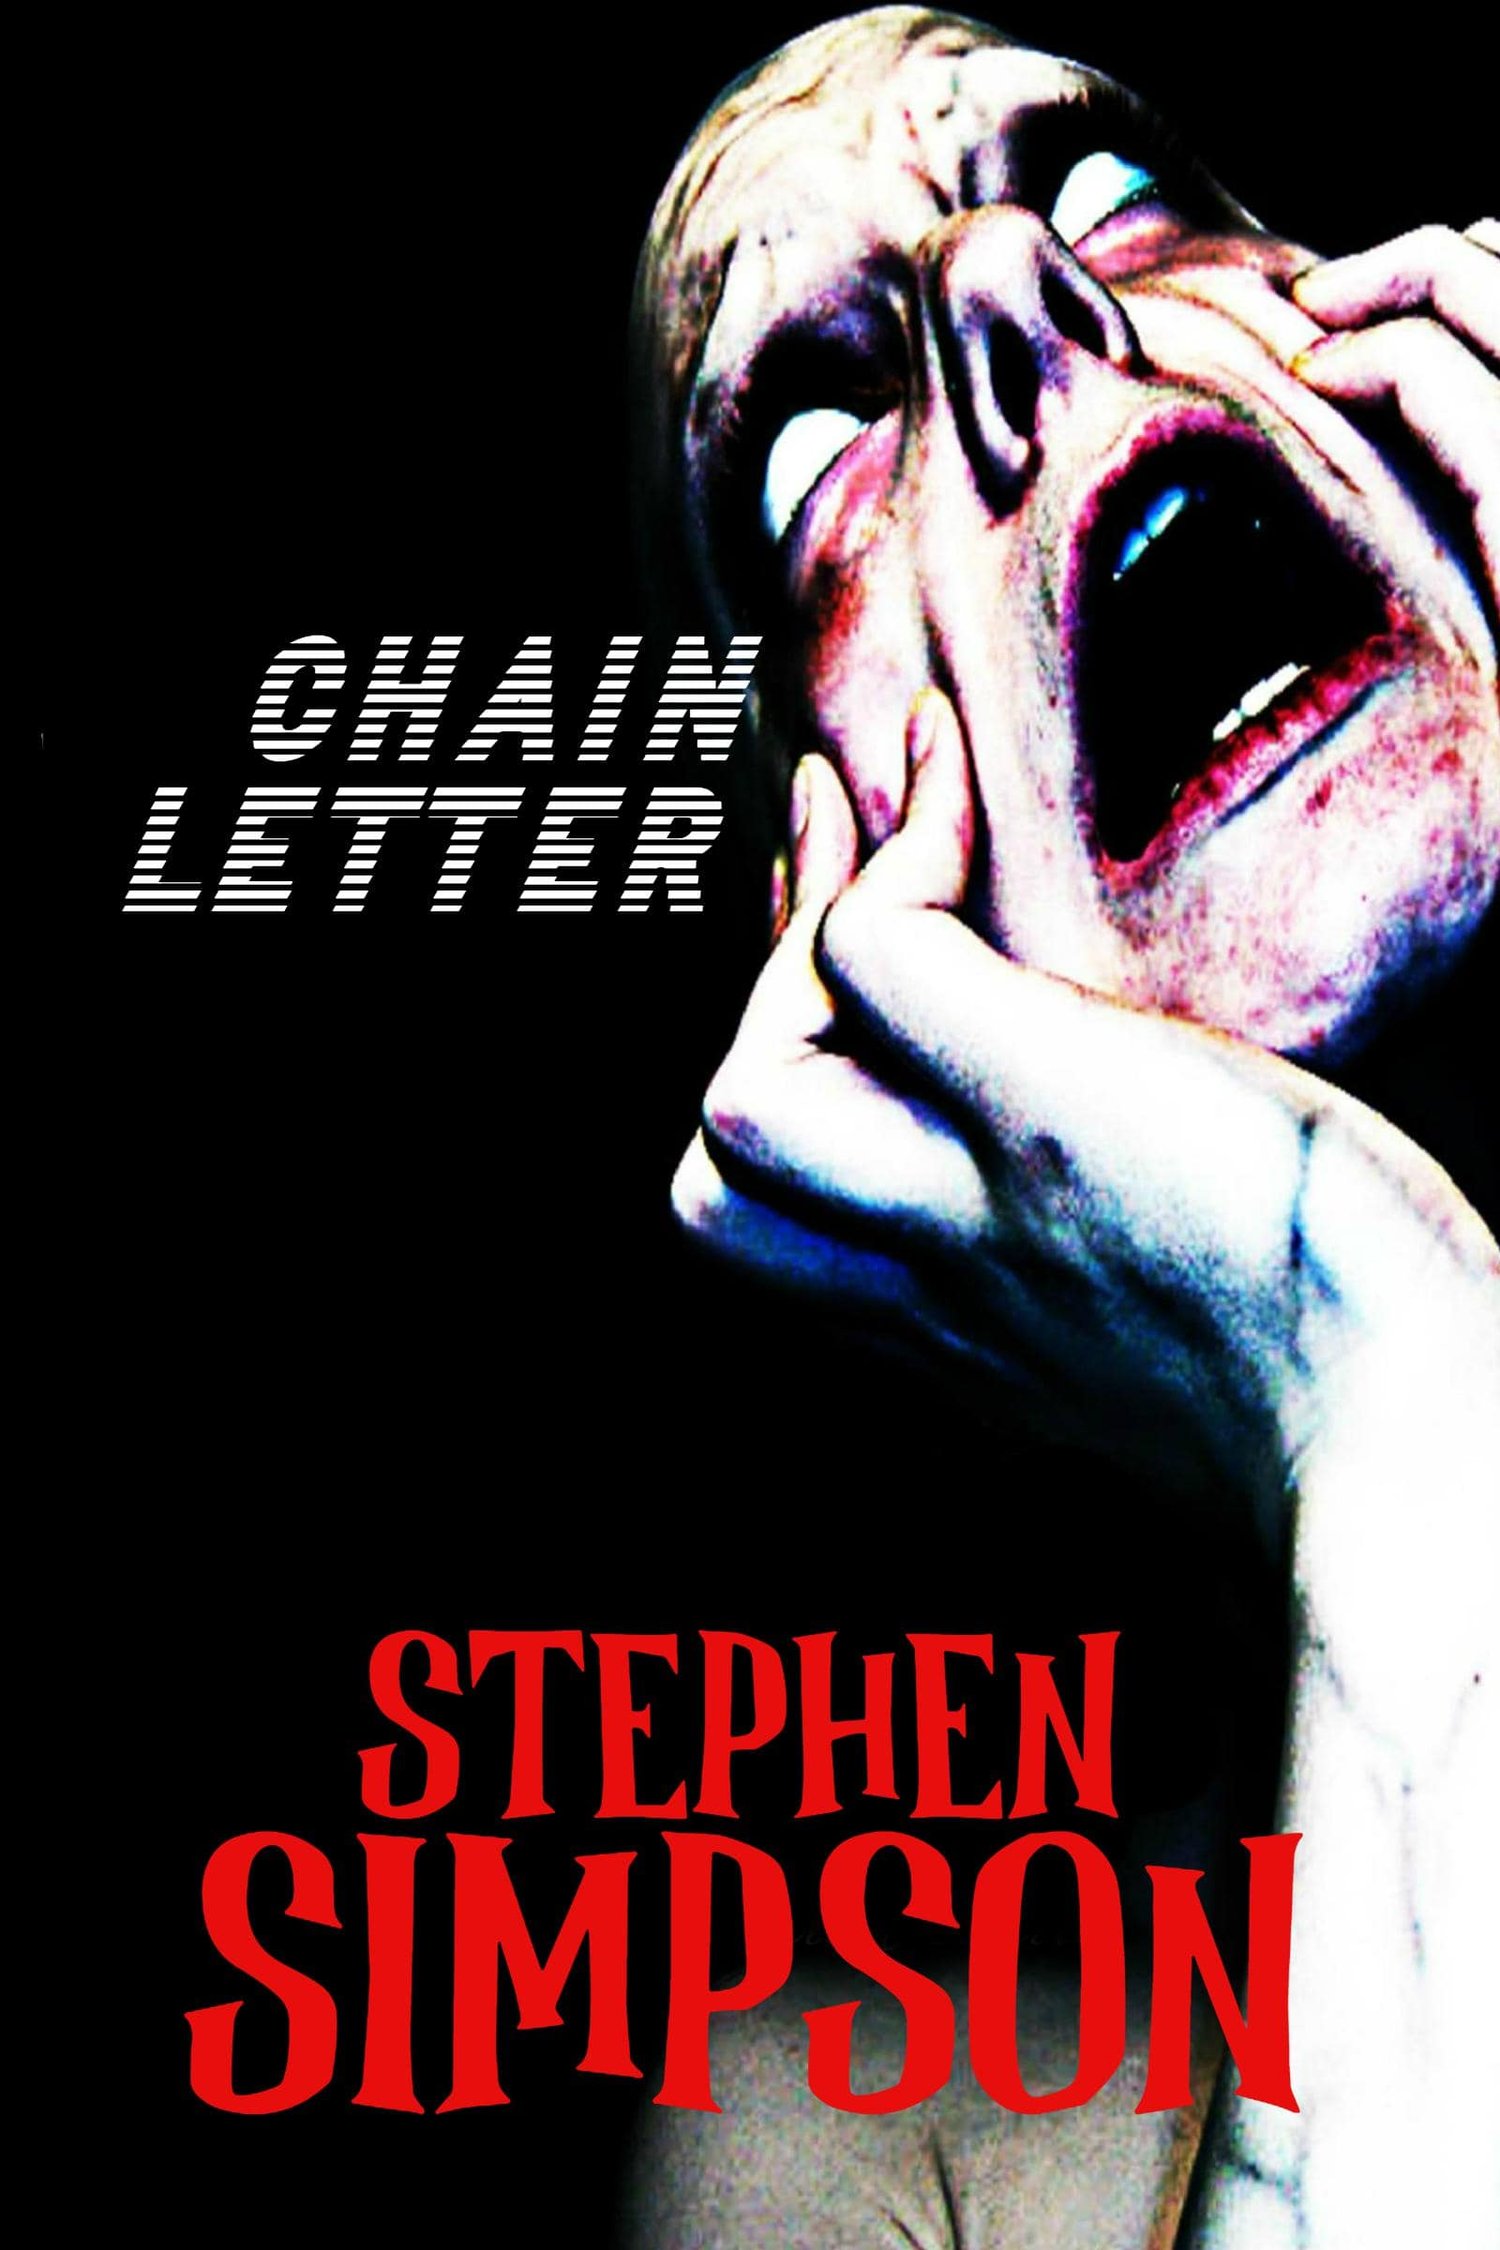 Read the first chapter of Chain Letter by Stephen Simpson